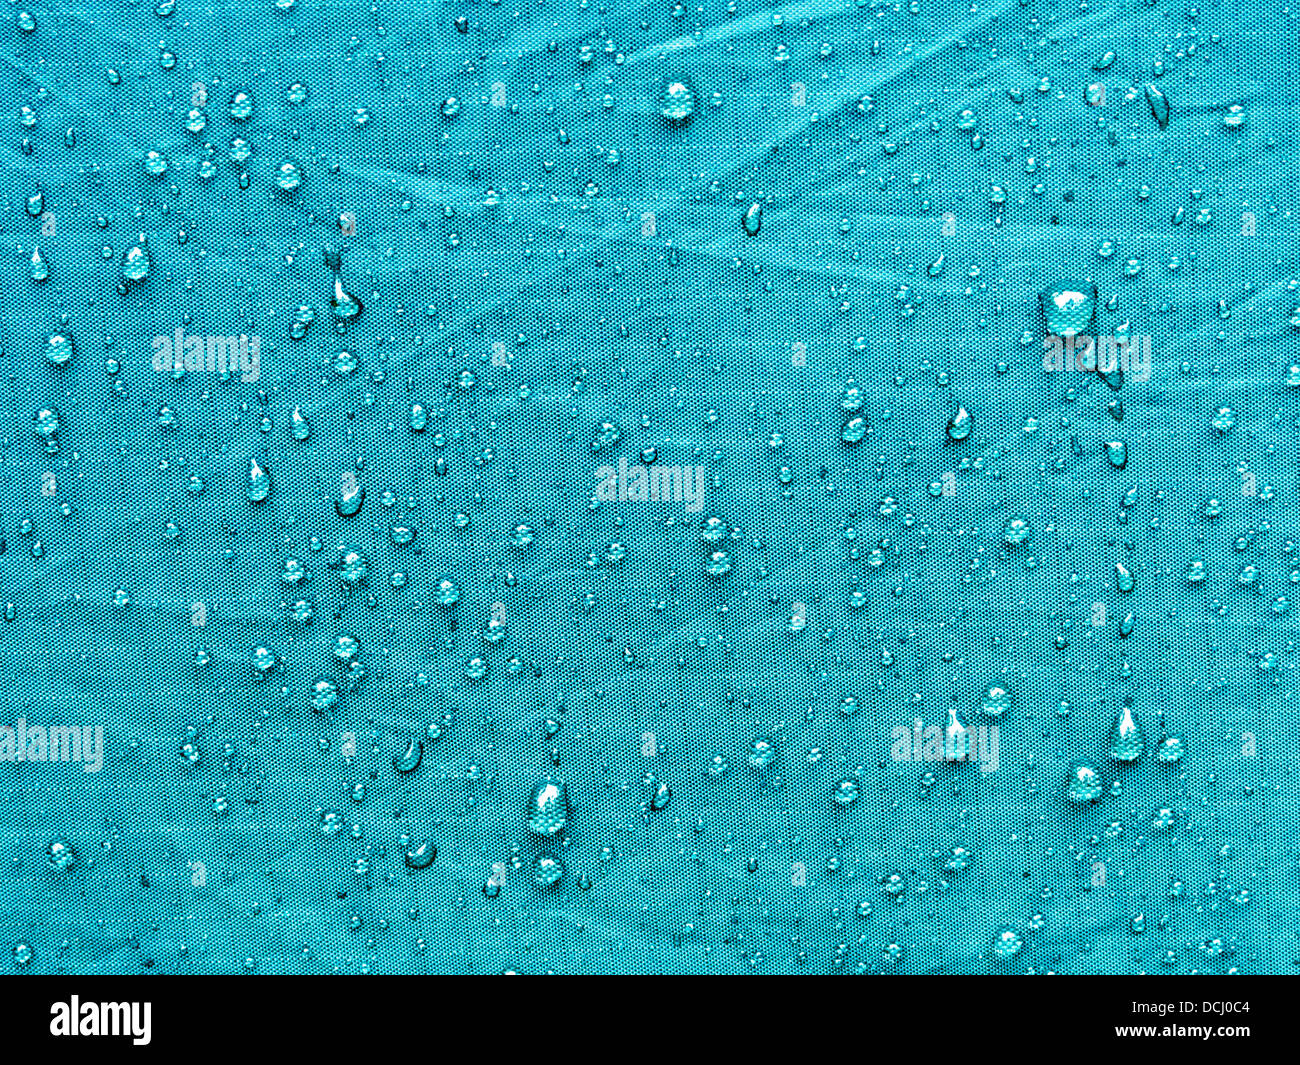 many raindrops on the waterproof tent material Stock Photo